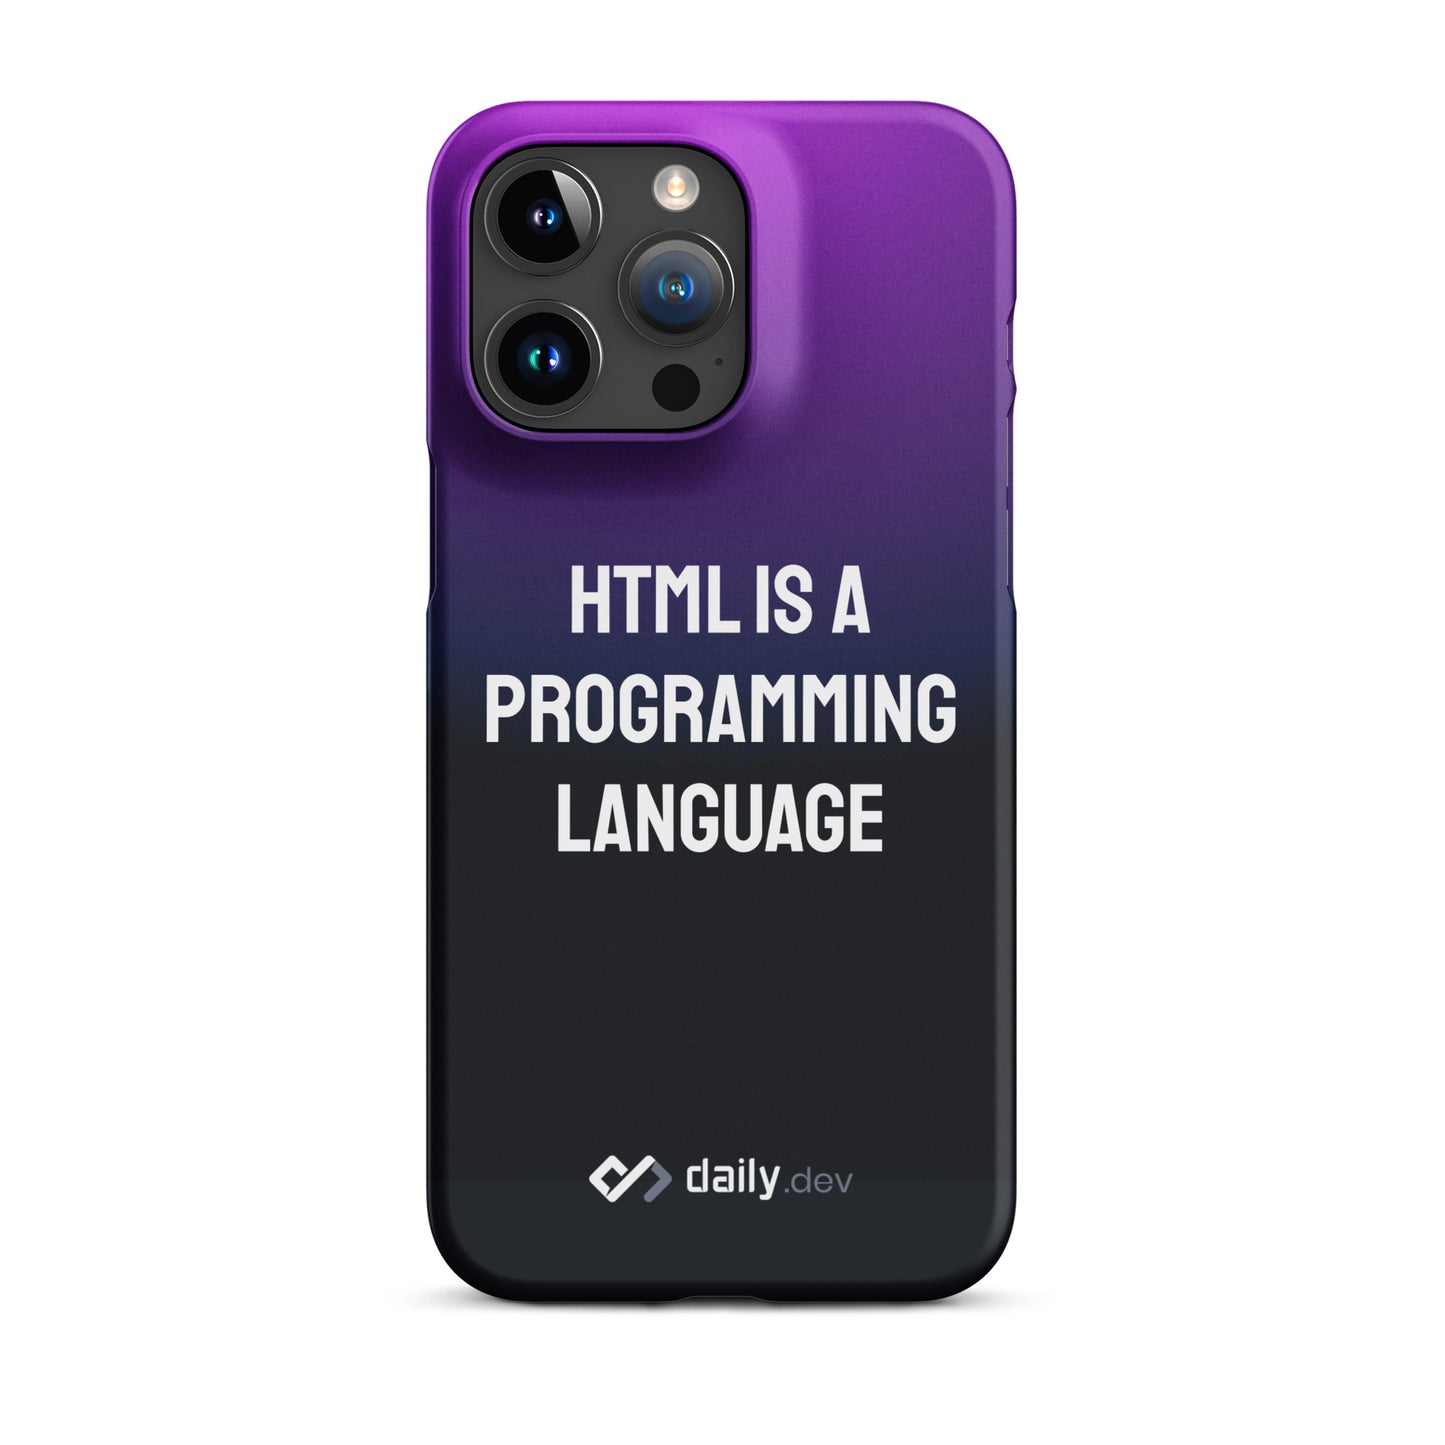 daily.dev Snap case for iPhone® - HTML is a Programming Language